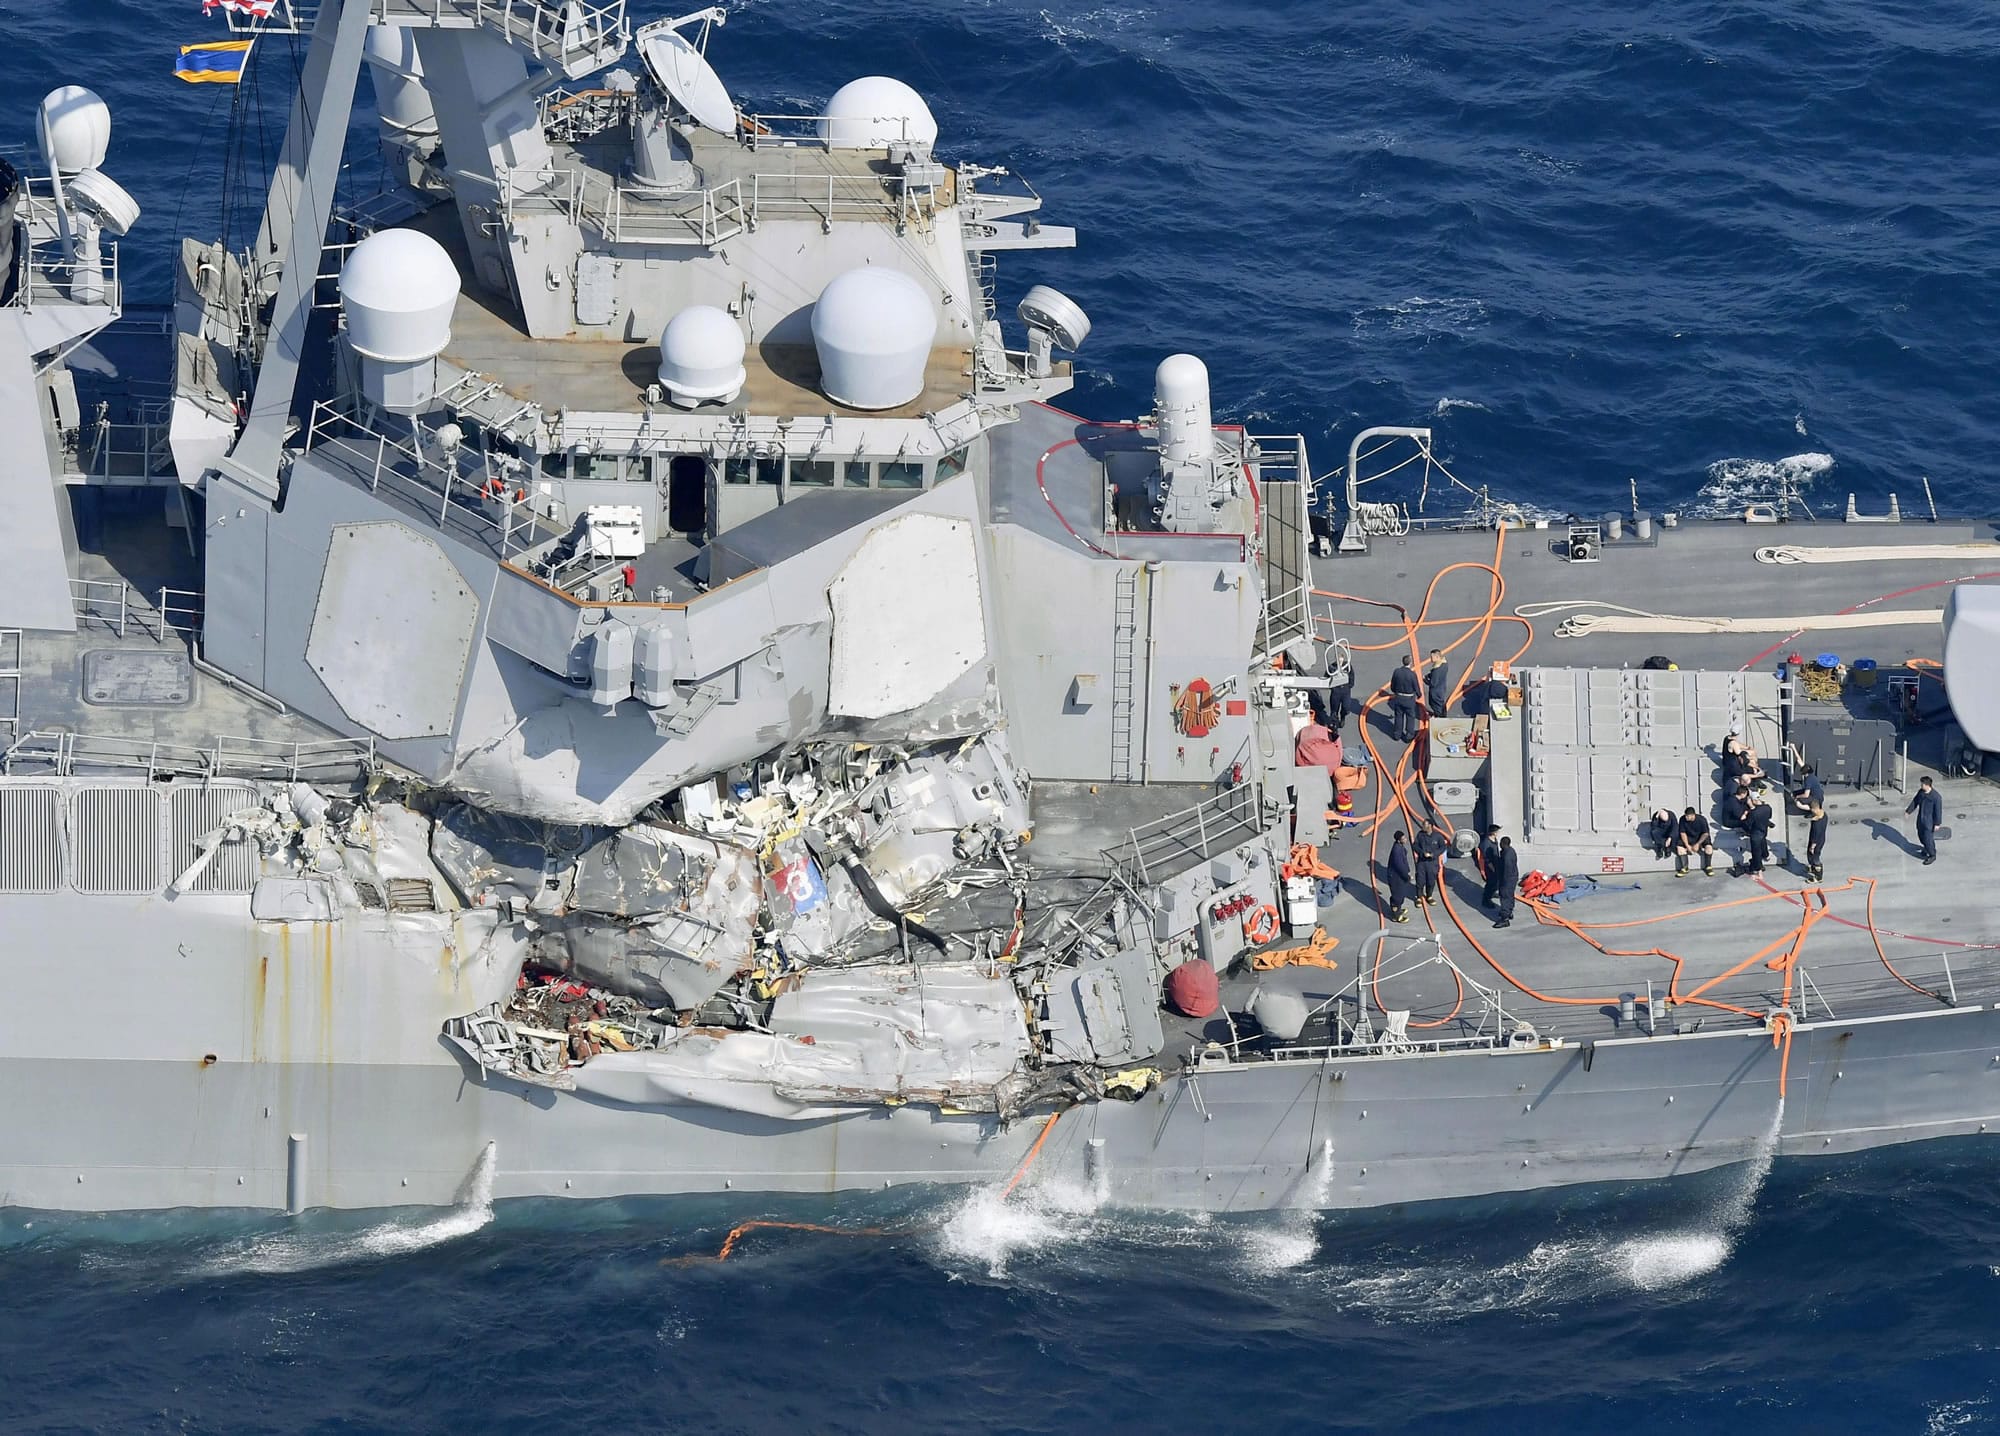 The damage of the right side of the USS Fitzgerald is seen off Shimoda, Shizuoka prefecture, Japan, after the Navy destroyer collided with a merchant ship, Saturday,  June 16, 2017.  The U.S. Navy says the USS Fitzgerald suffered damage below the water line on its starboard side after it collided with a Philippine-flagged merchant ship.